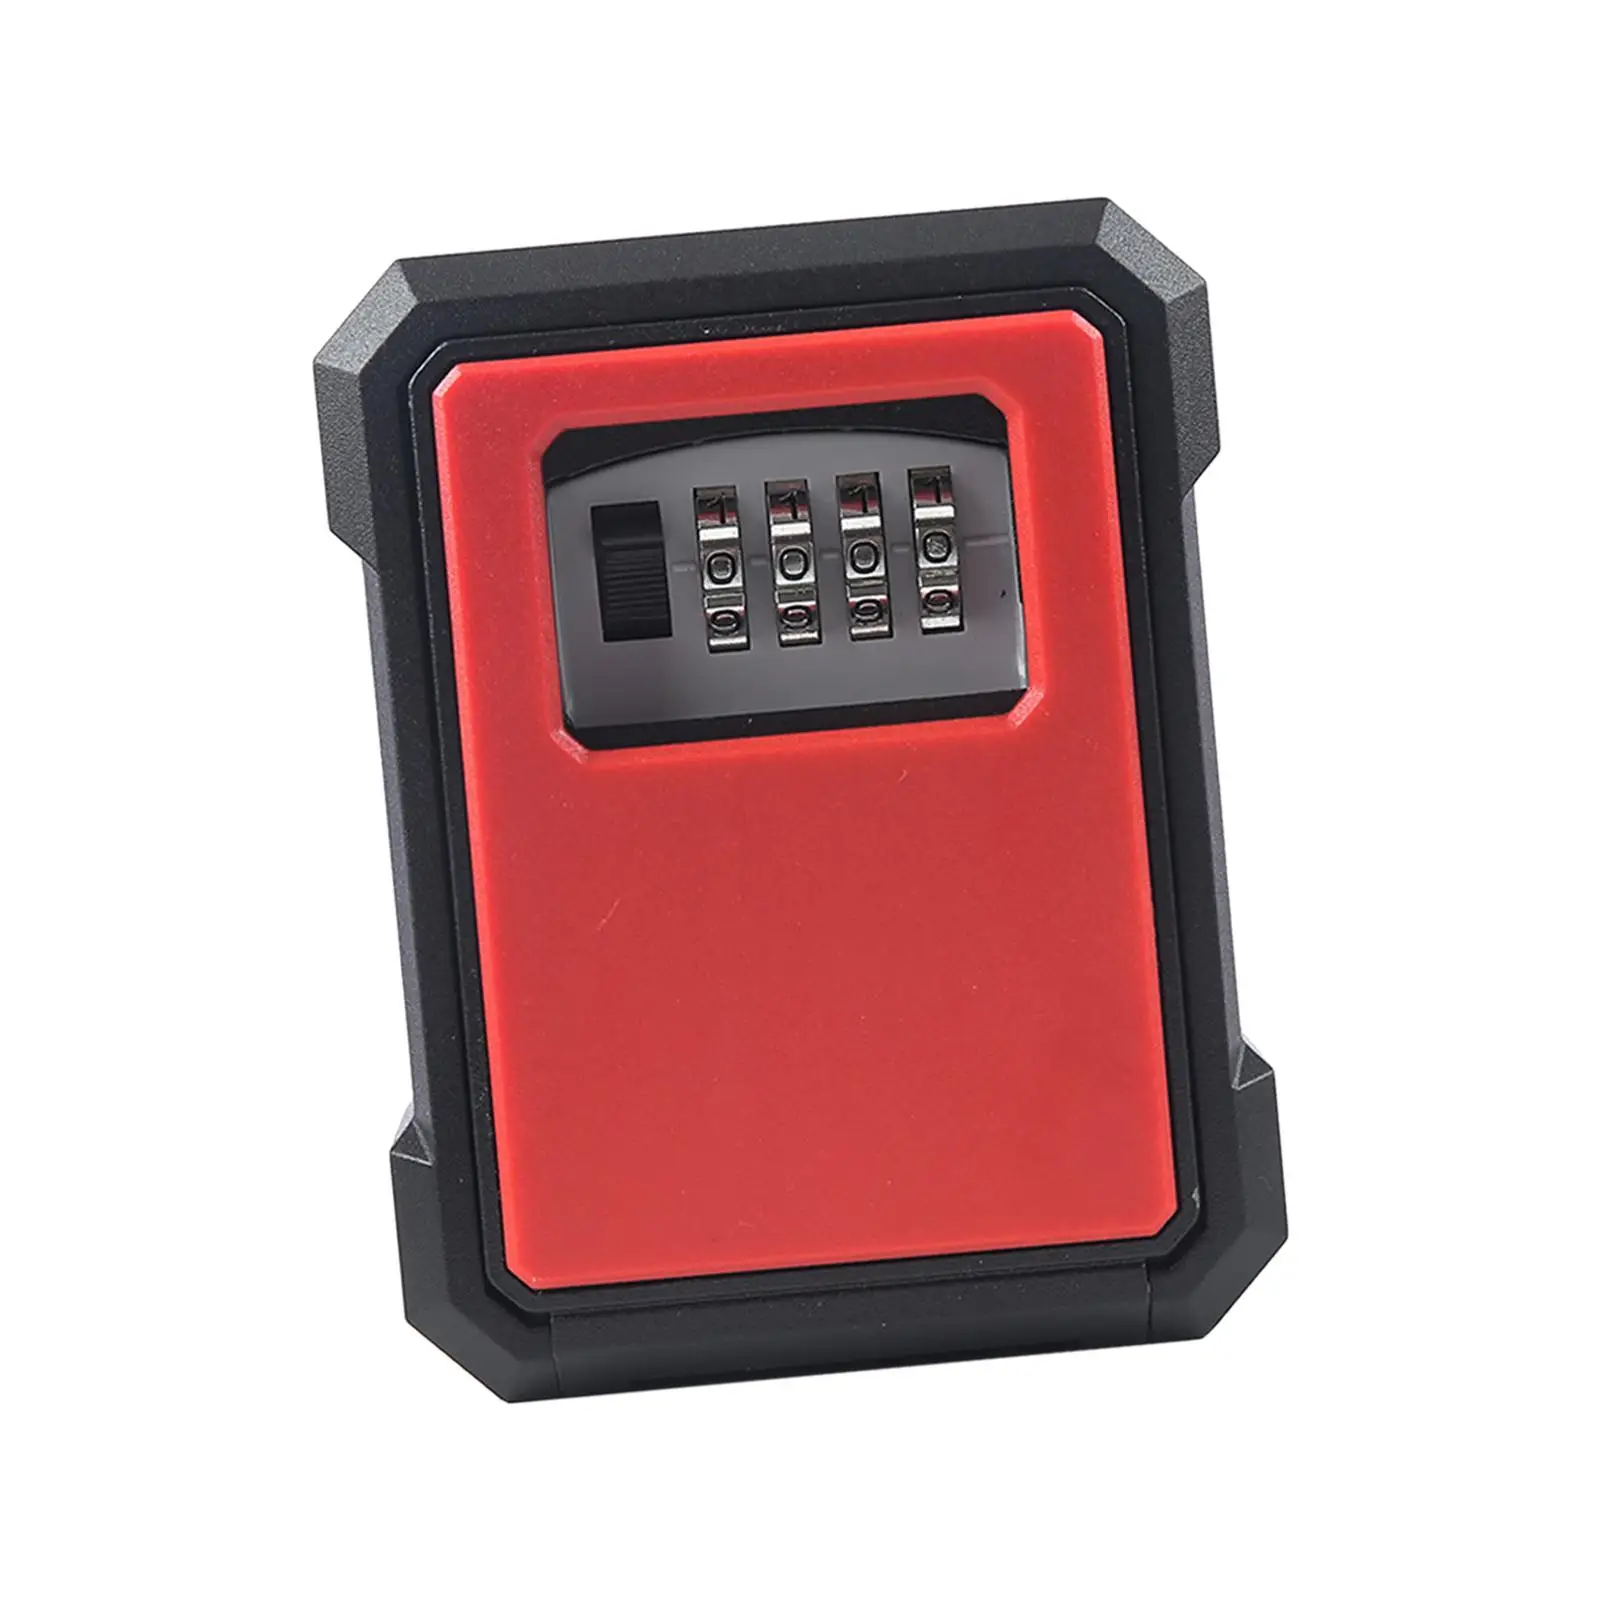 Outdoor Key Storage Lock Box Combination Key Storage Lock Box Wall Mount Password Key Storage Case for Store Supplies